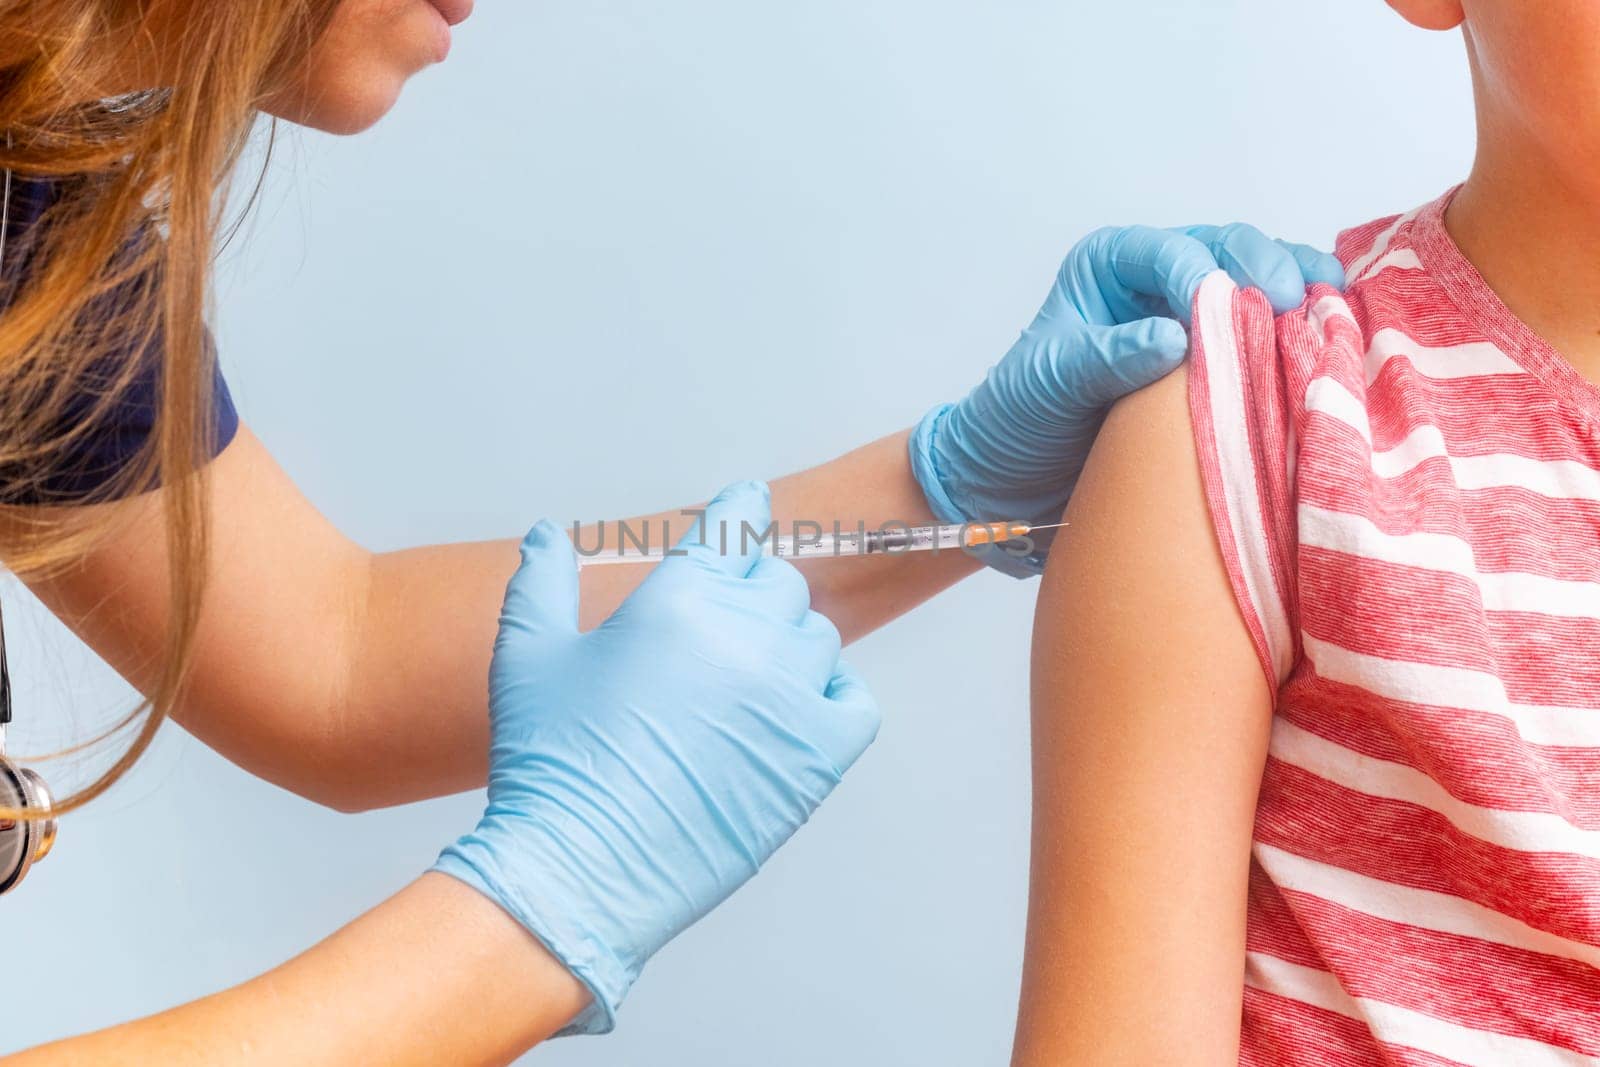 A healthcare professional administering a vaccine to a child's arm with a syringe, both wearing casual clothing.